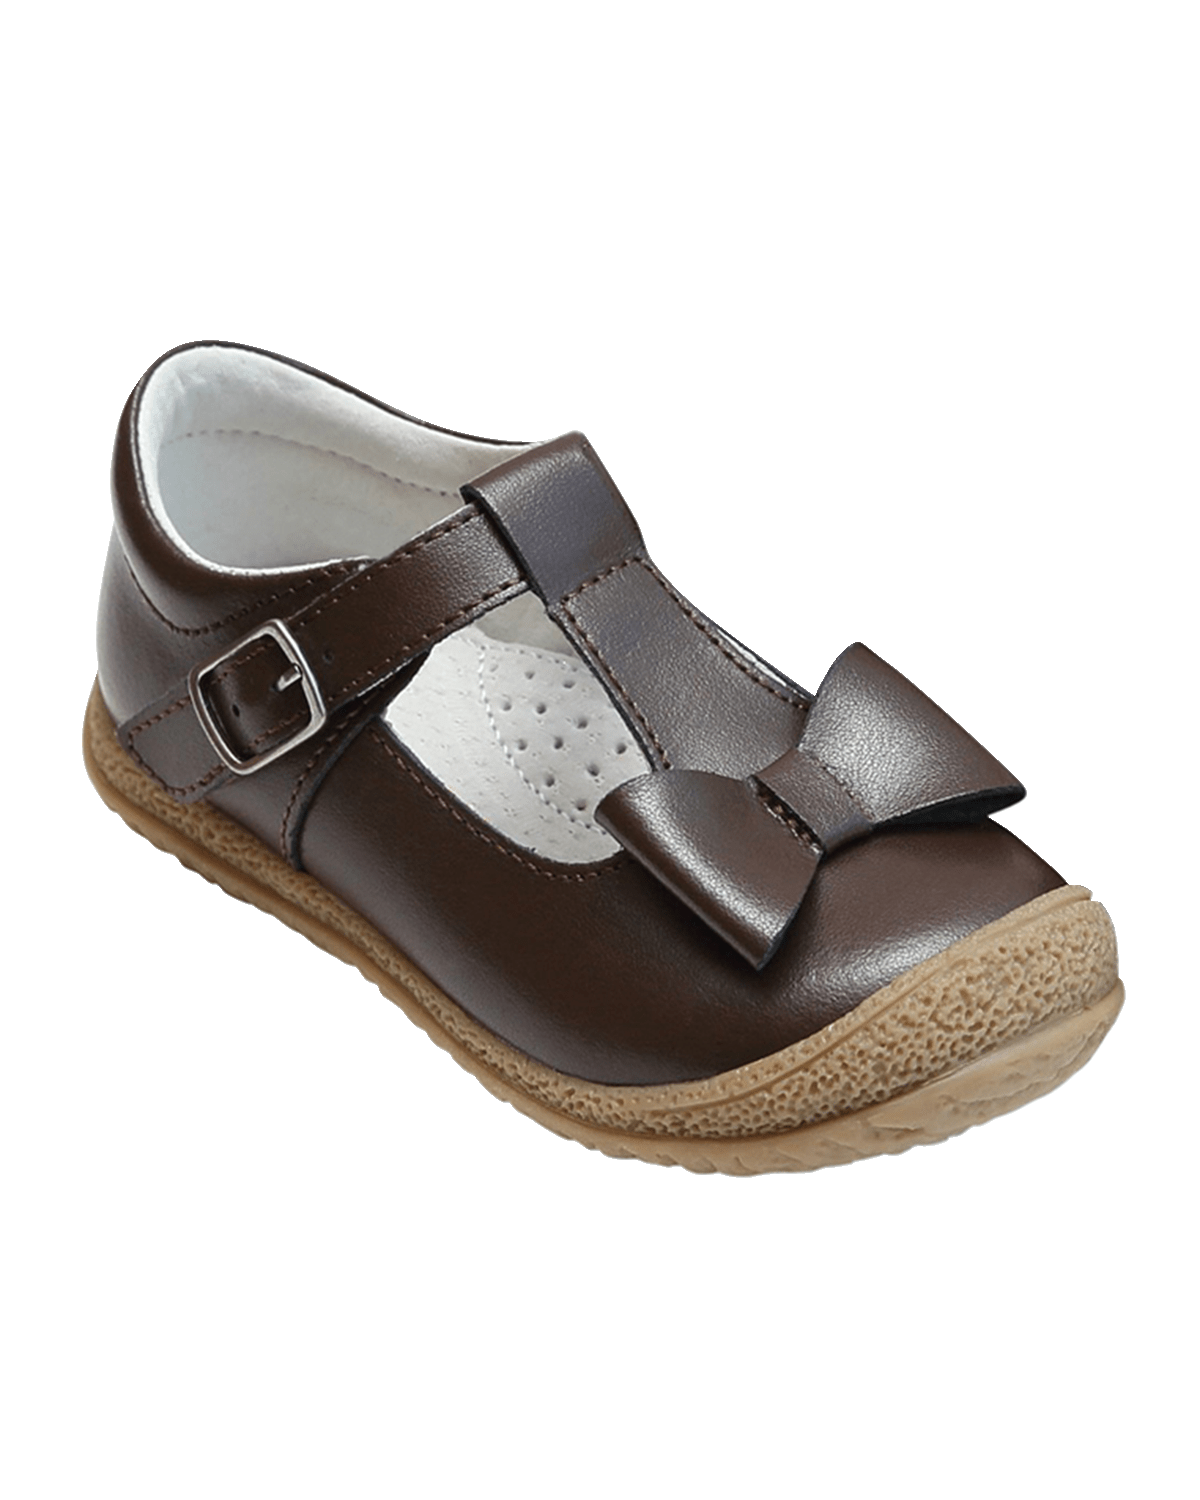 Elephantito Girl's Scholar Smooth Leather Penny Loafers, Baby/Toddler ...